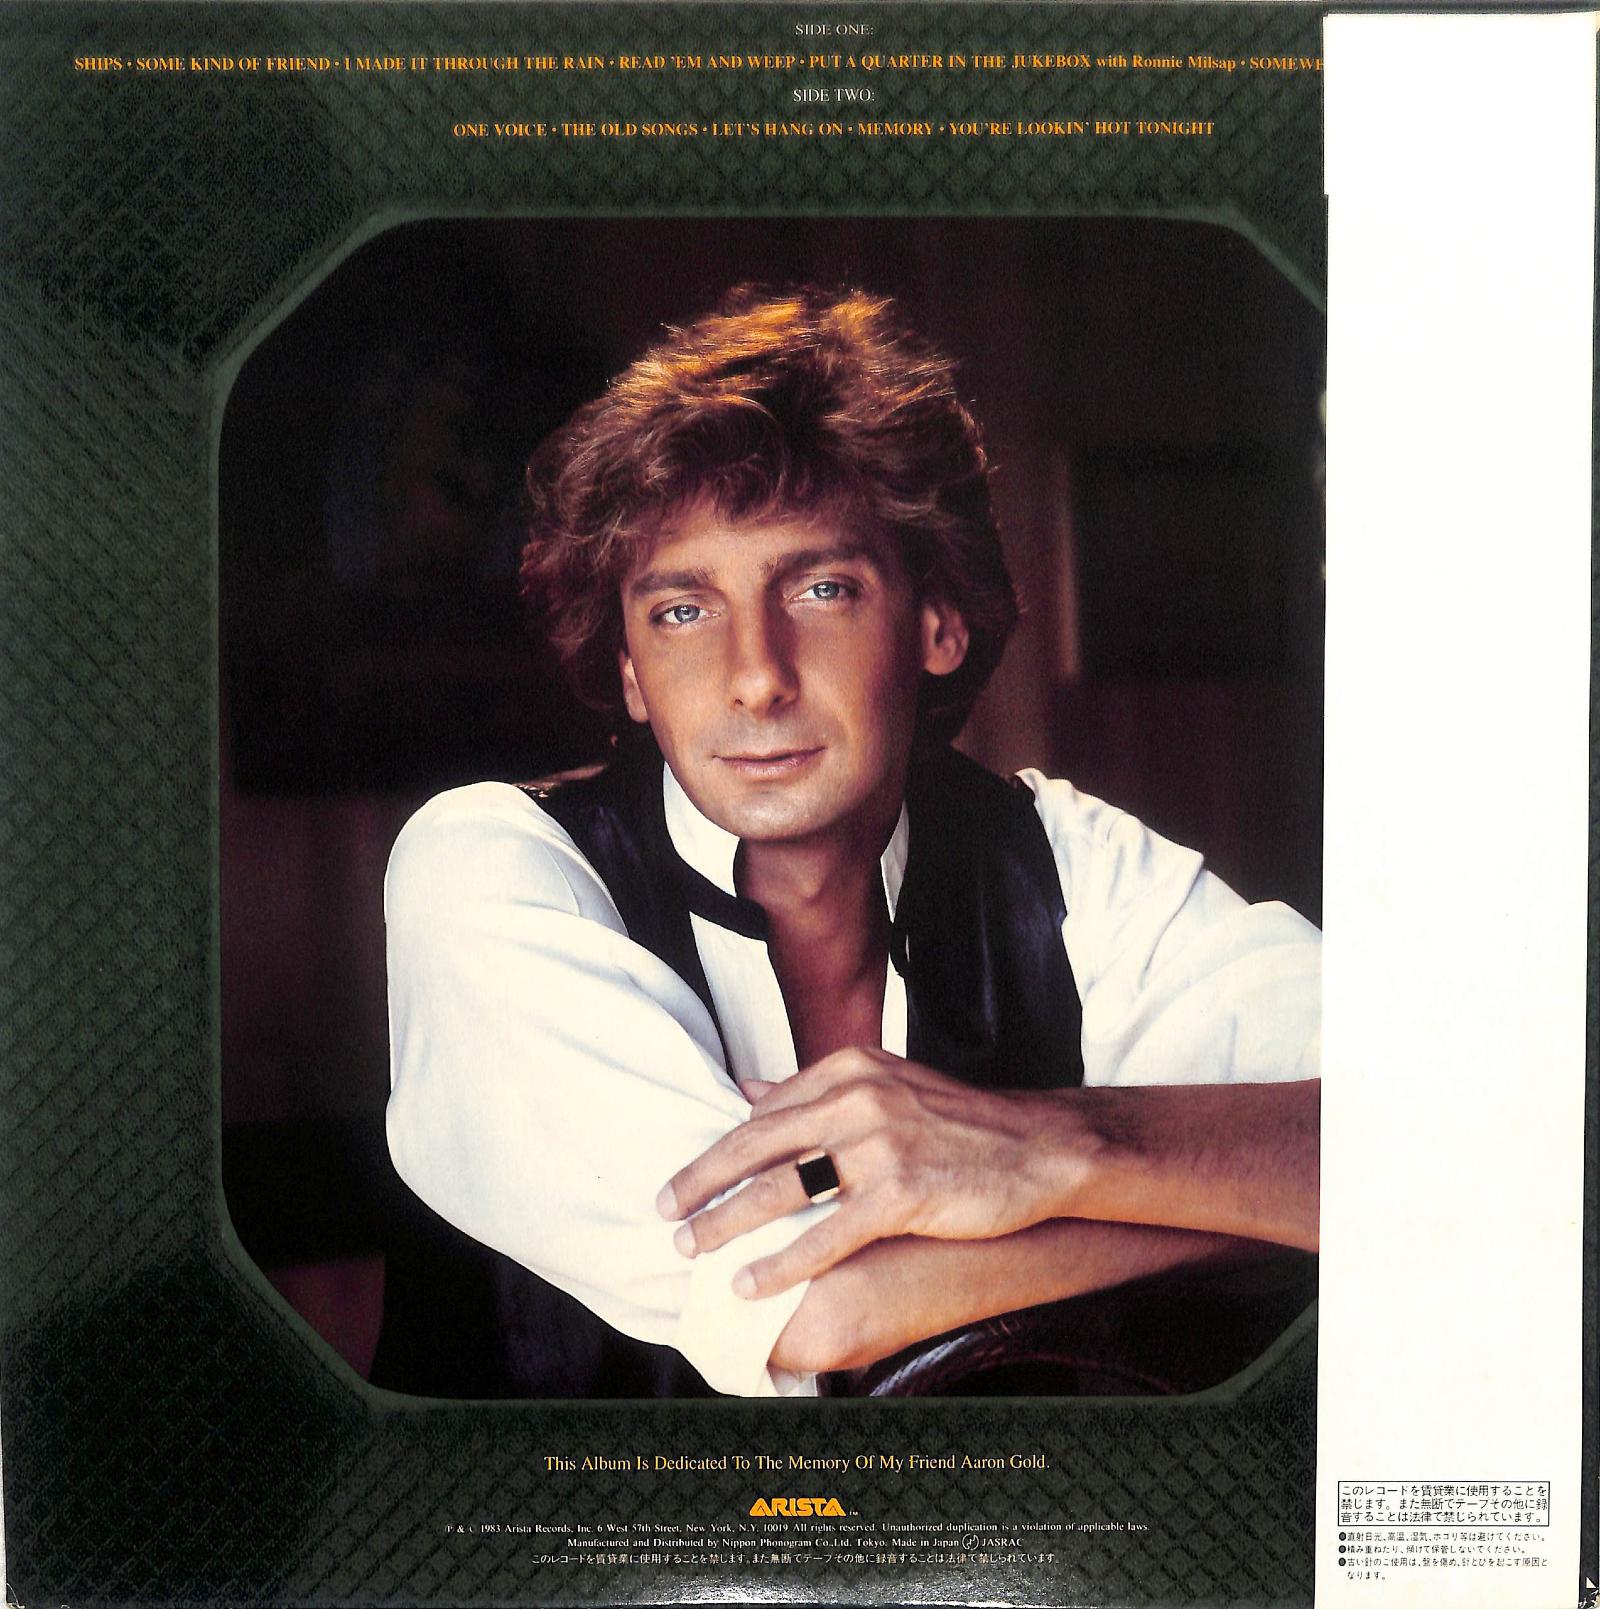 BARRY MANILOW - Greatest Hits Vol. II